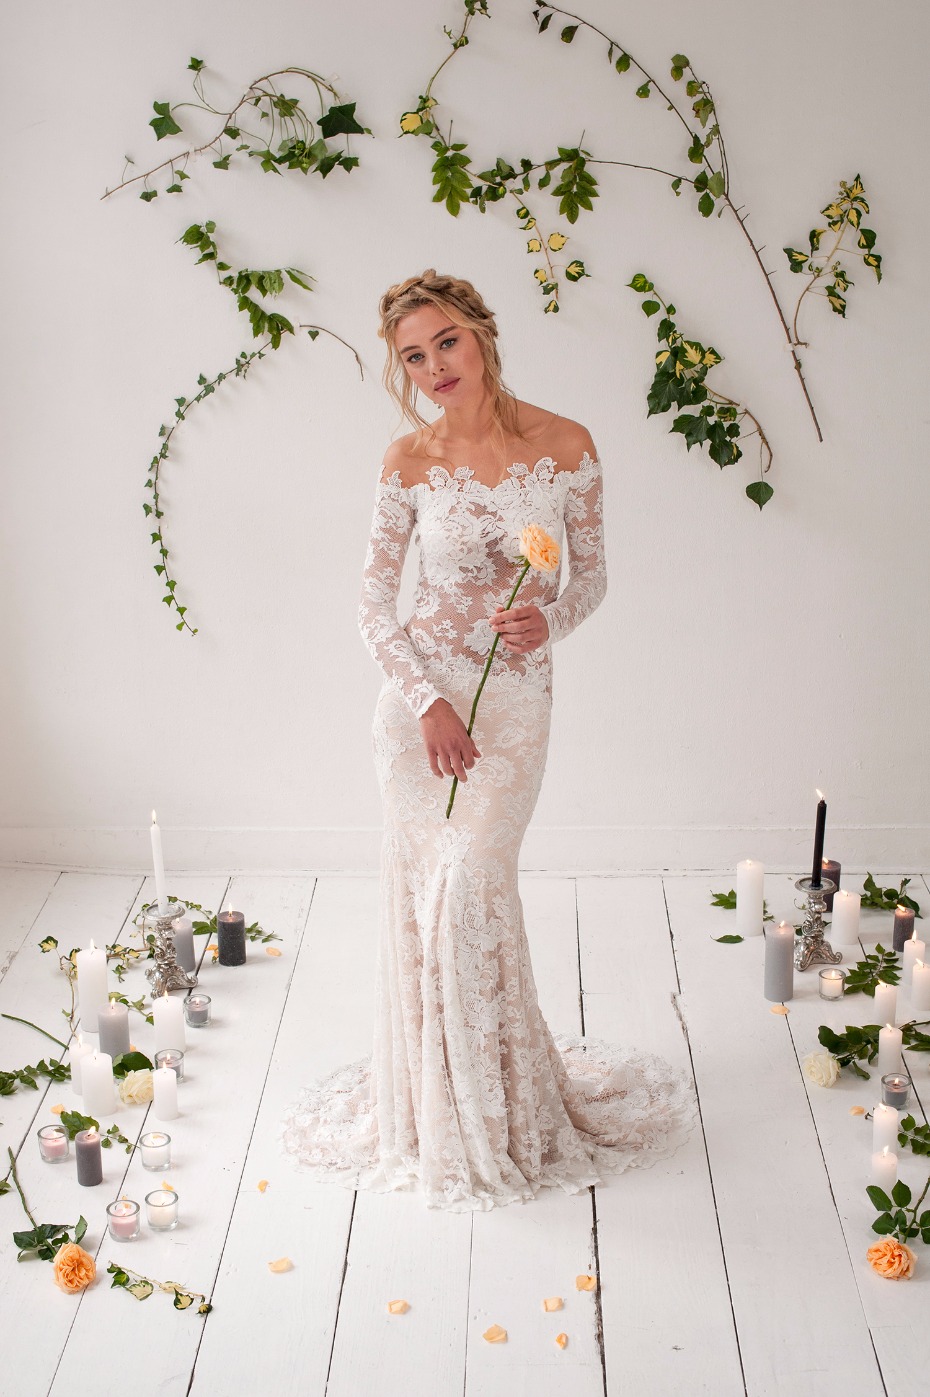 Gorgeous lace gown from Olvi's